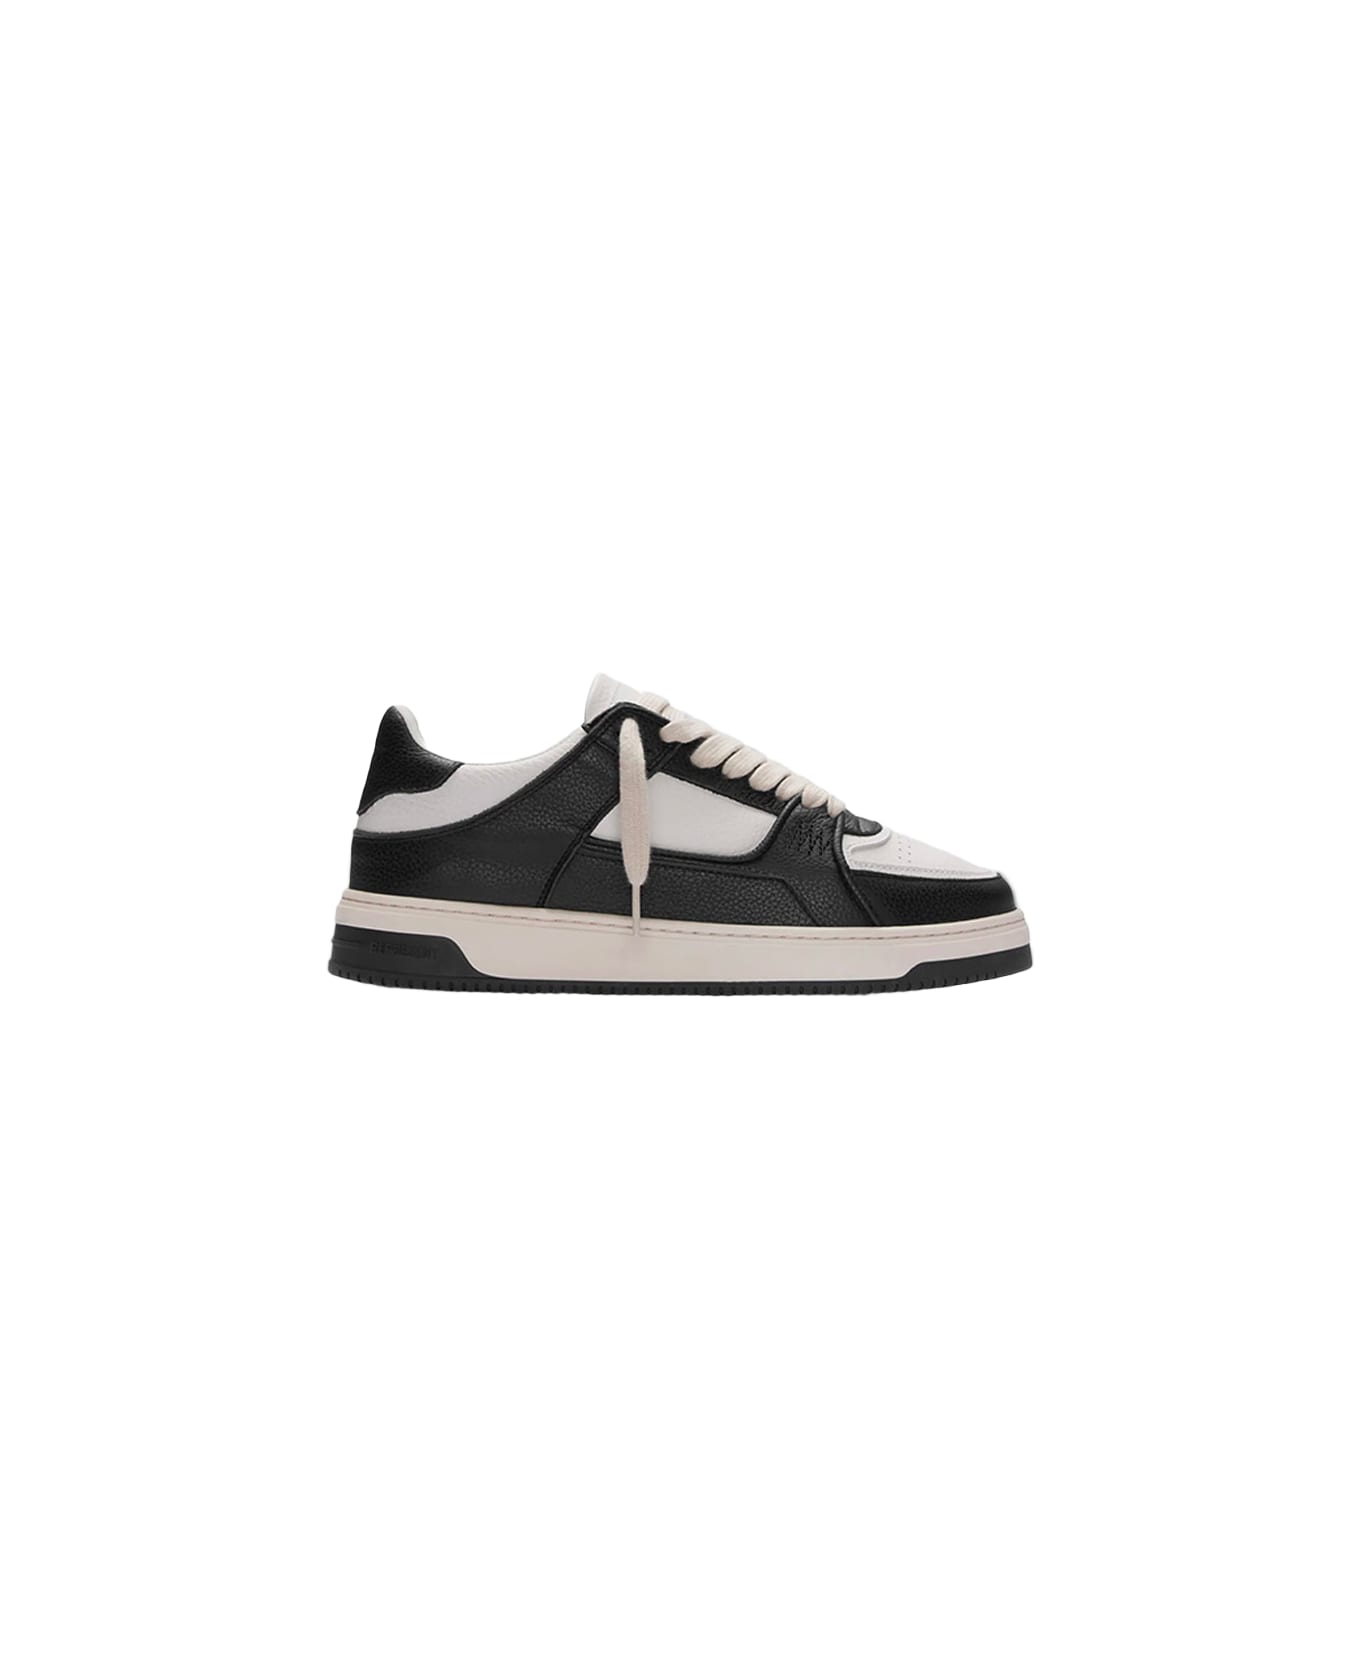 REPRESENT Apex Off White And Black Leather Low Top Sneaker - Apex Sneakers - VINTAGE WHITE